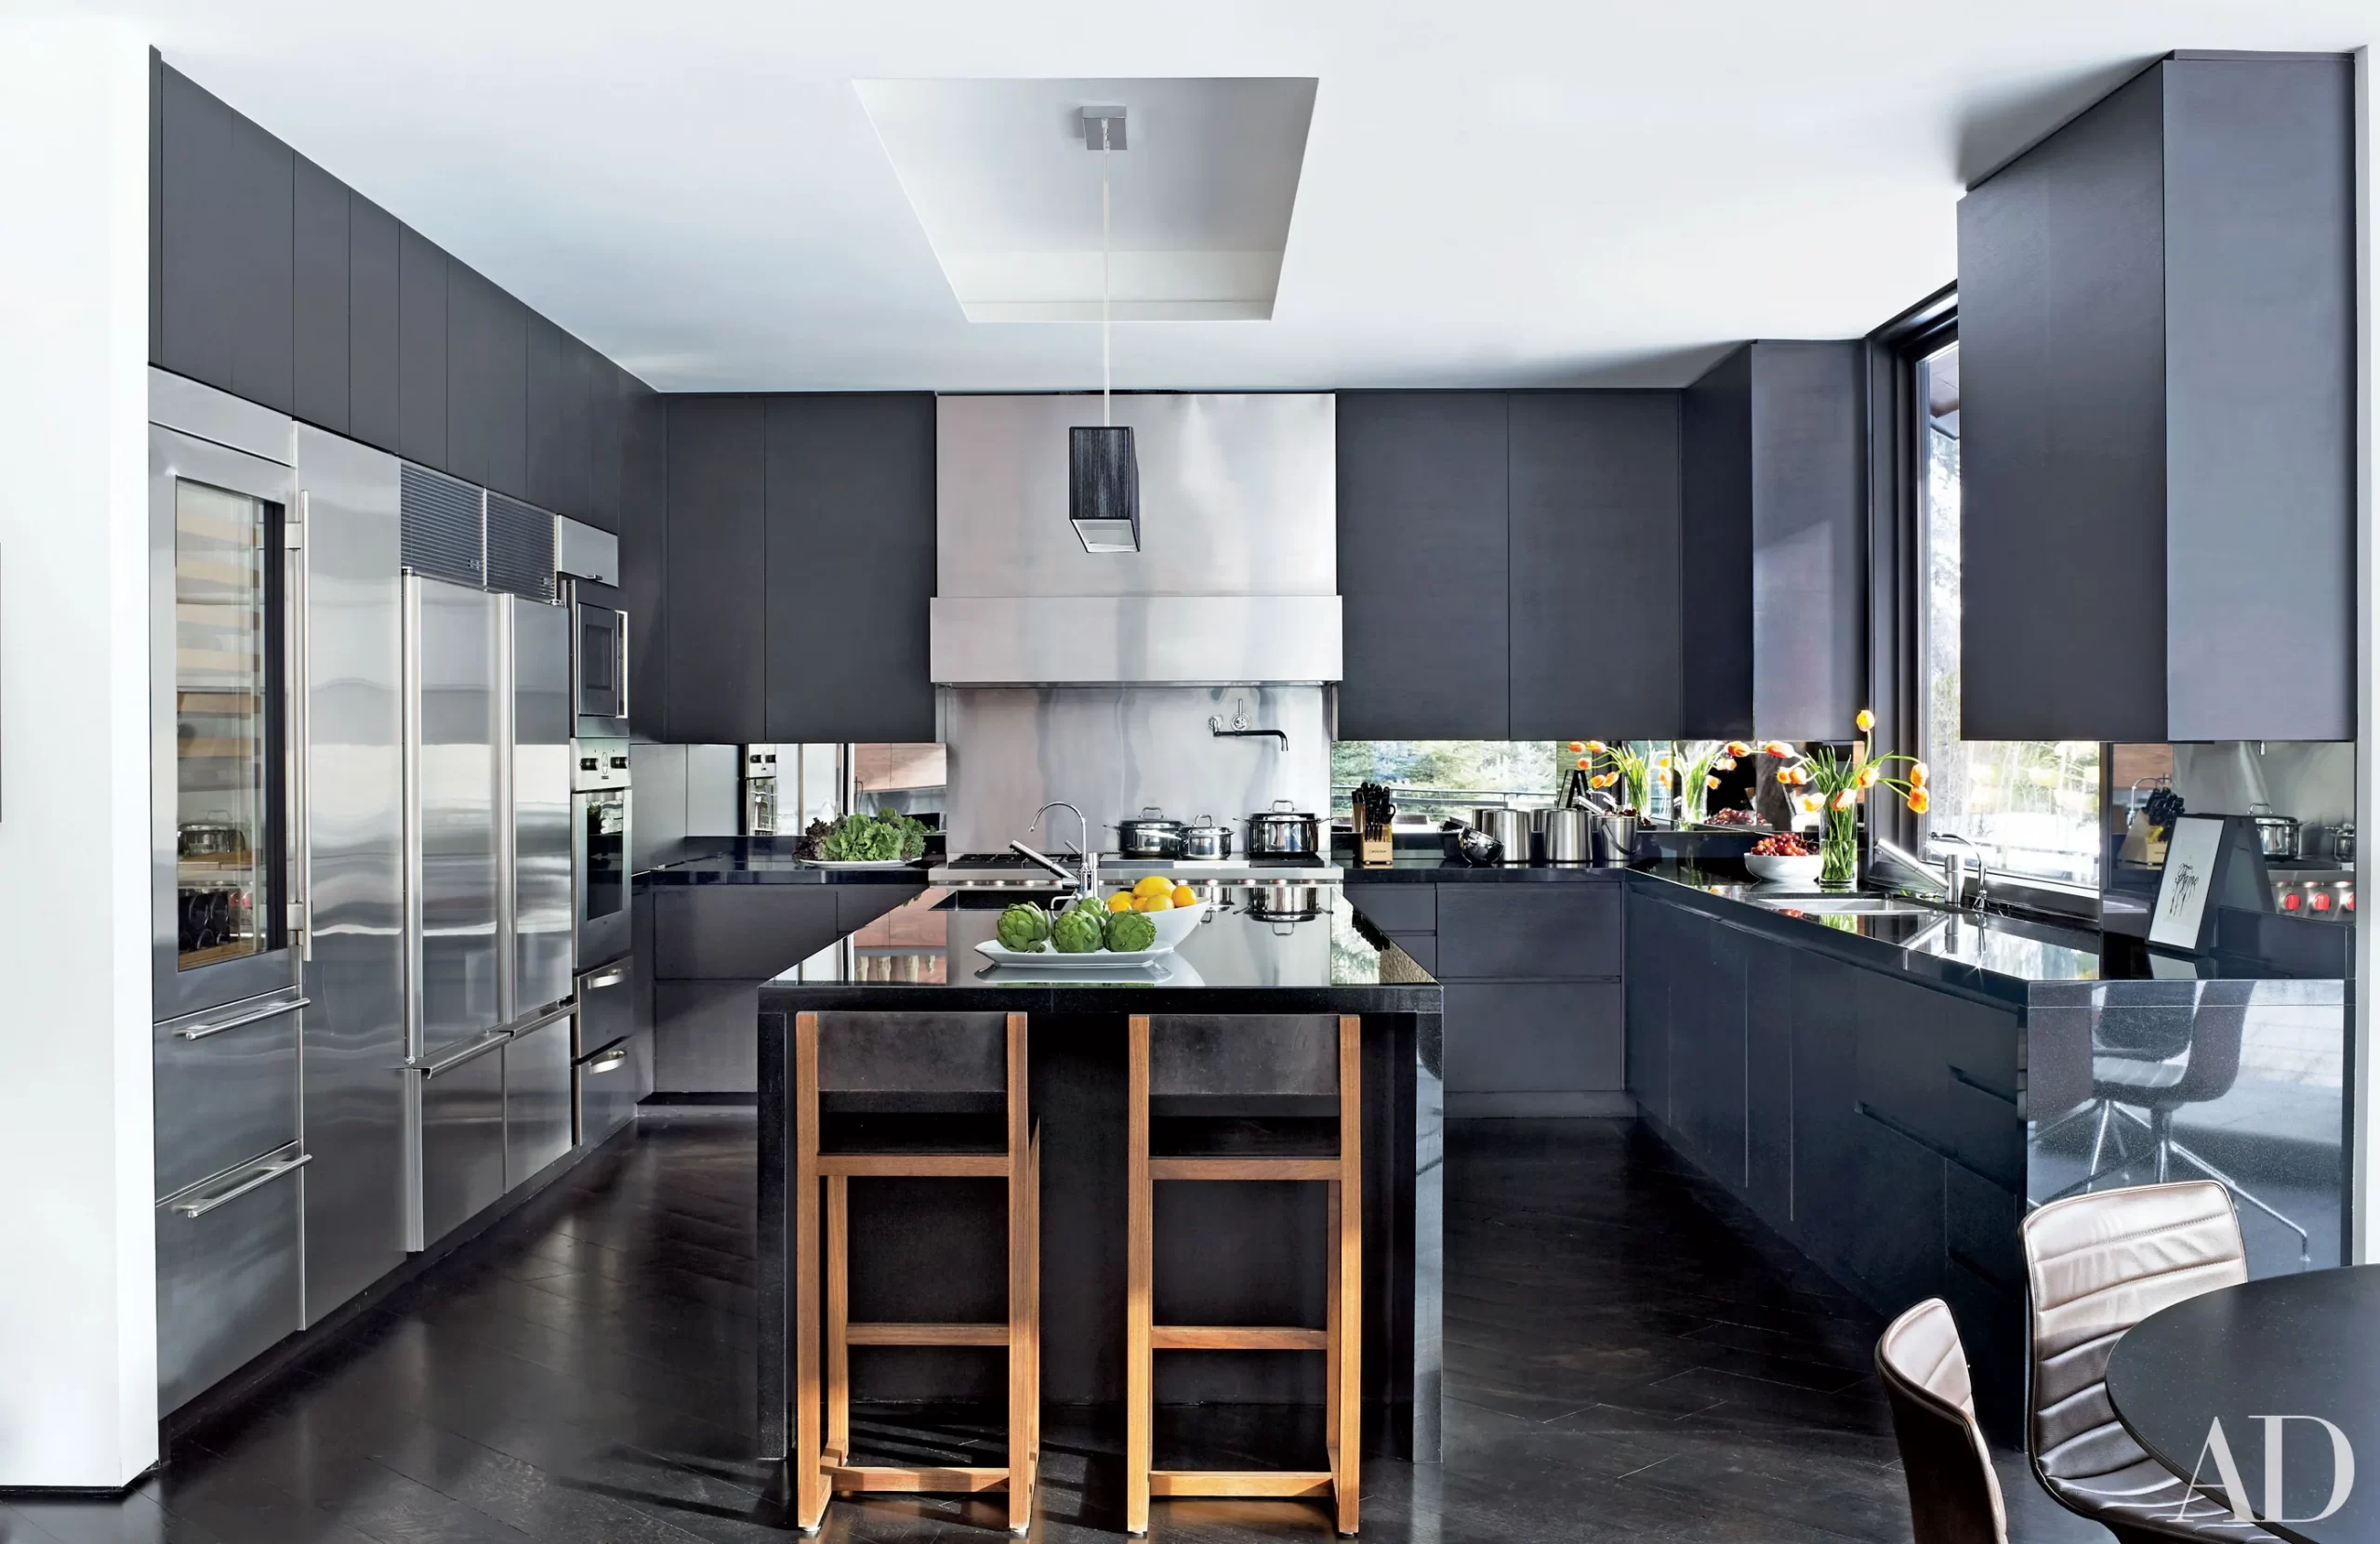 Before and After: Kitchen Renovation Inspiration